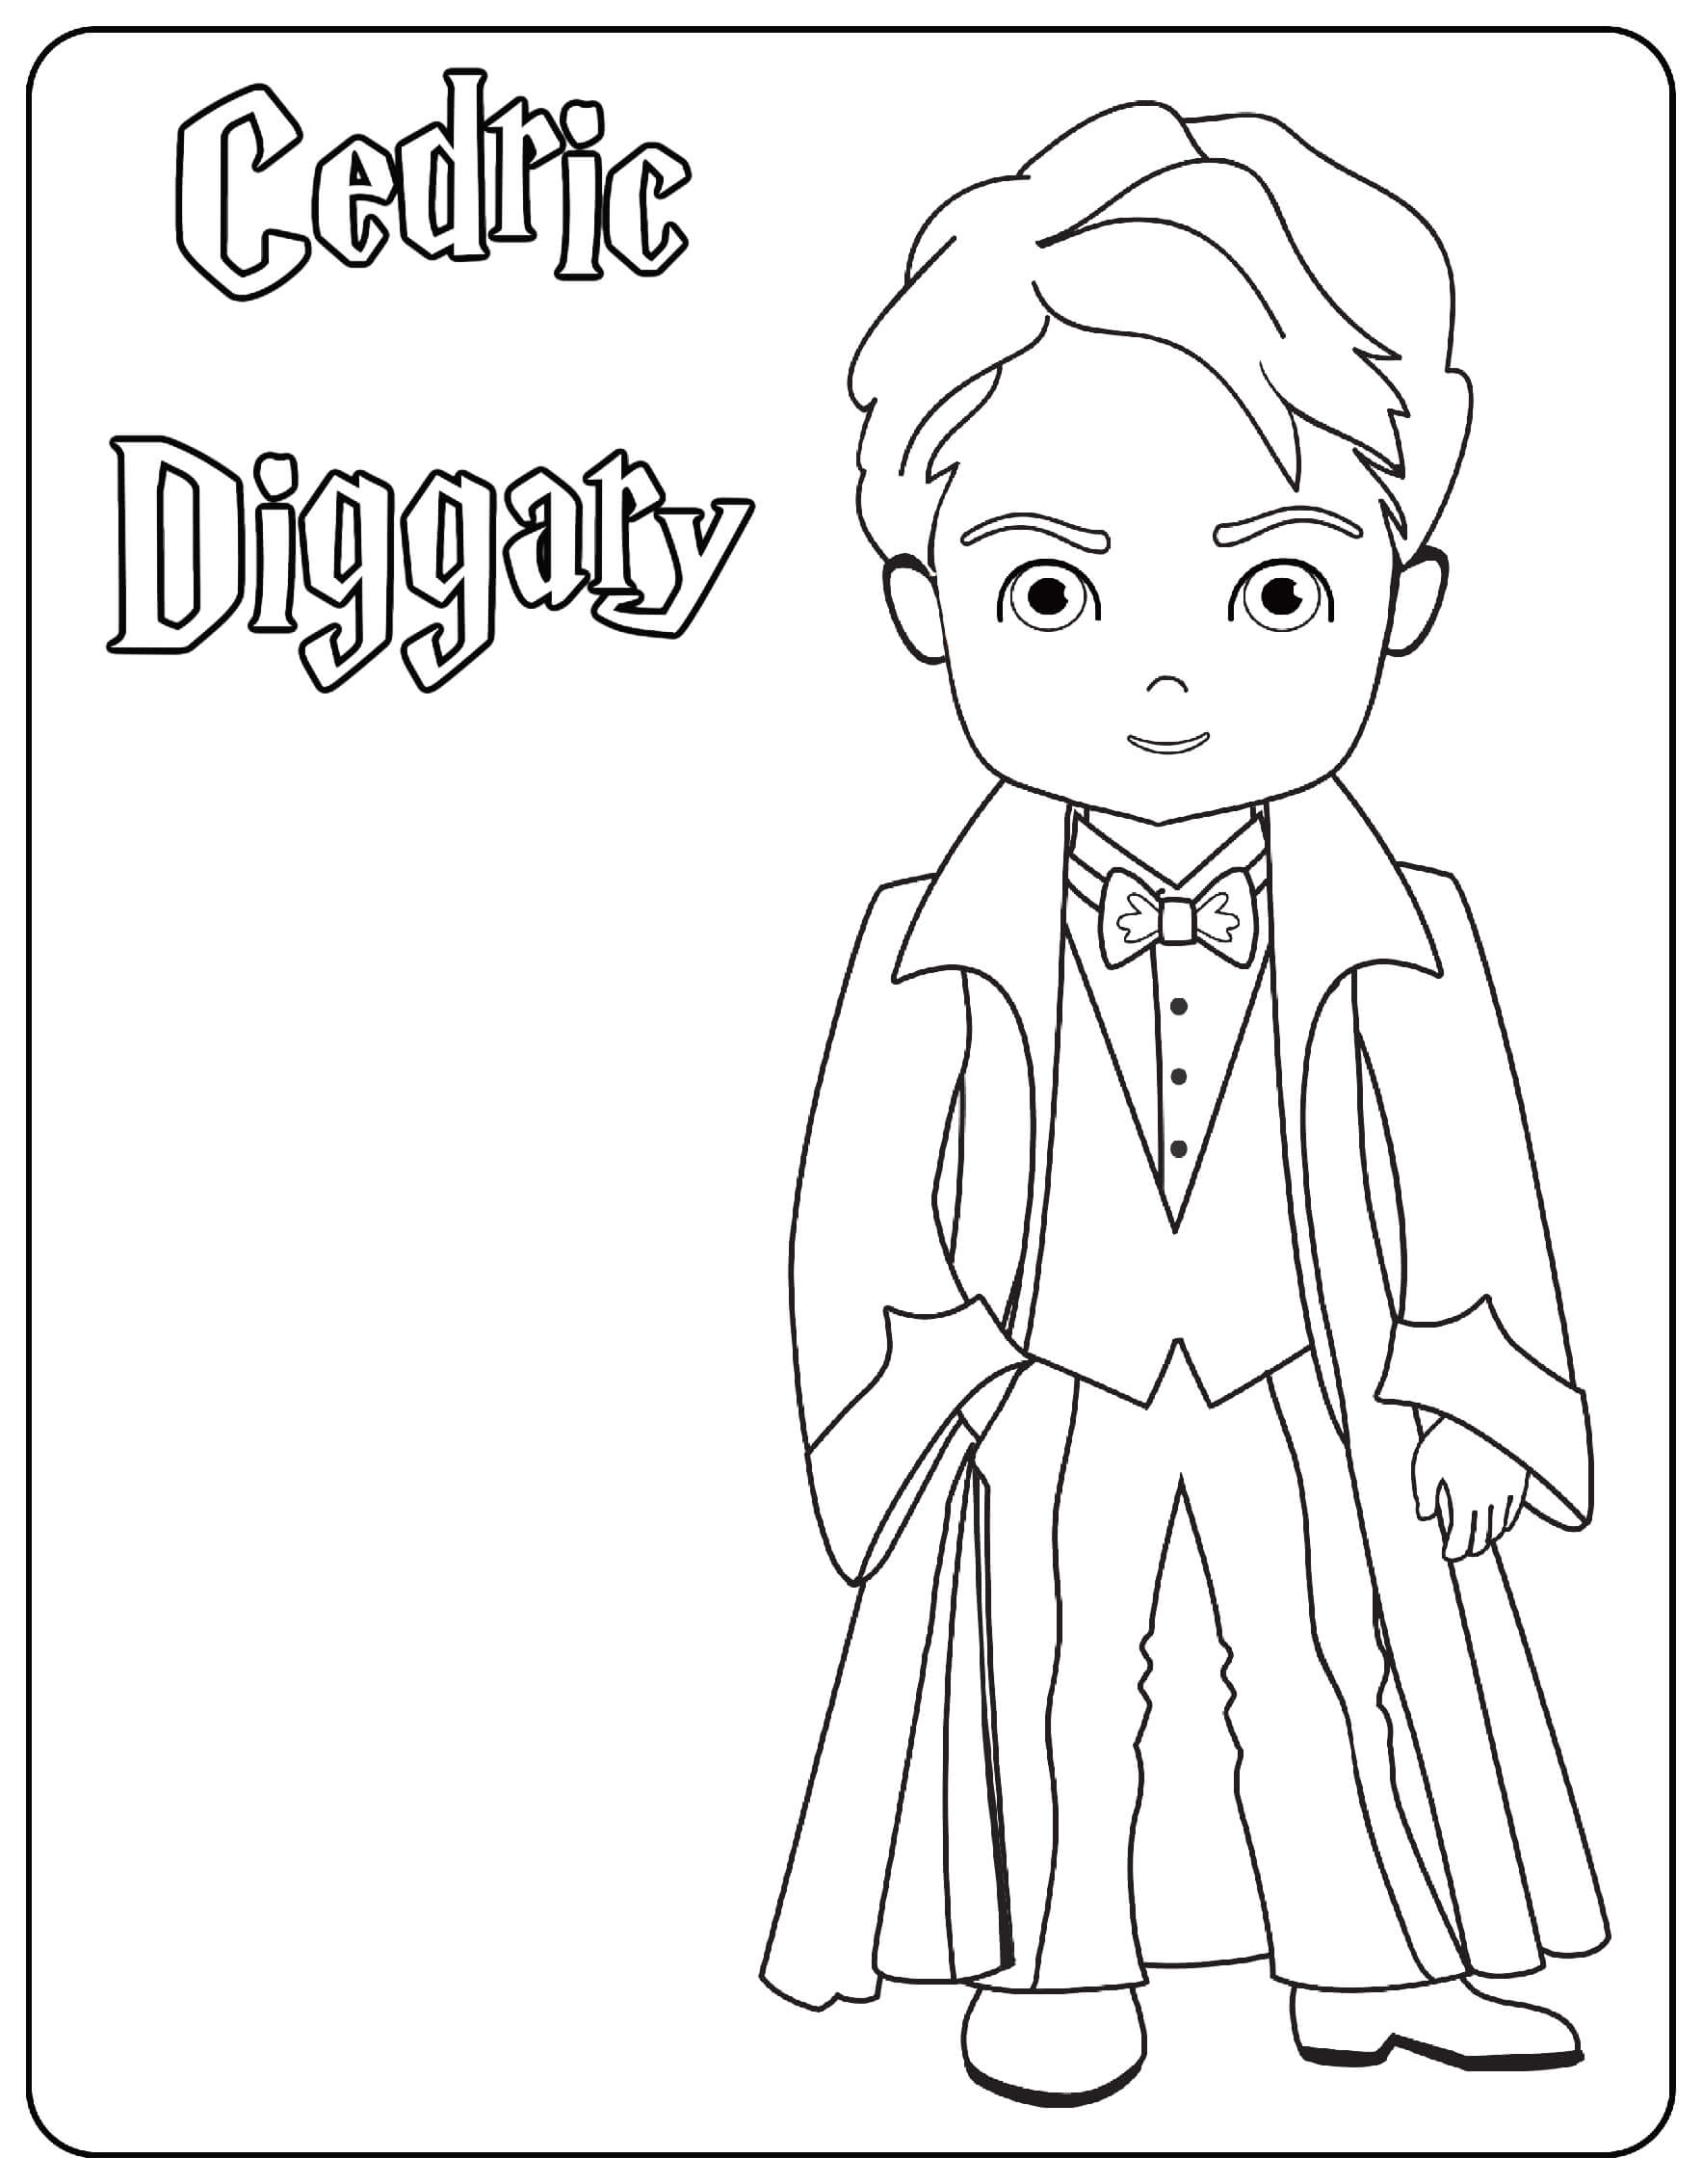 Cedric Diggary Coloring Page